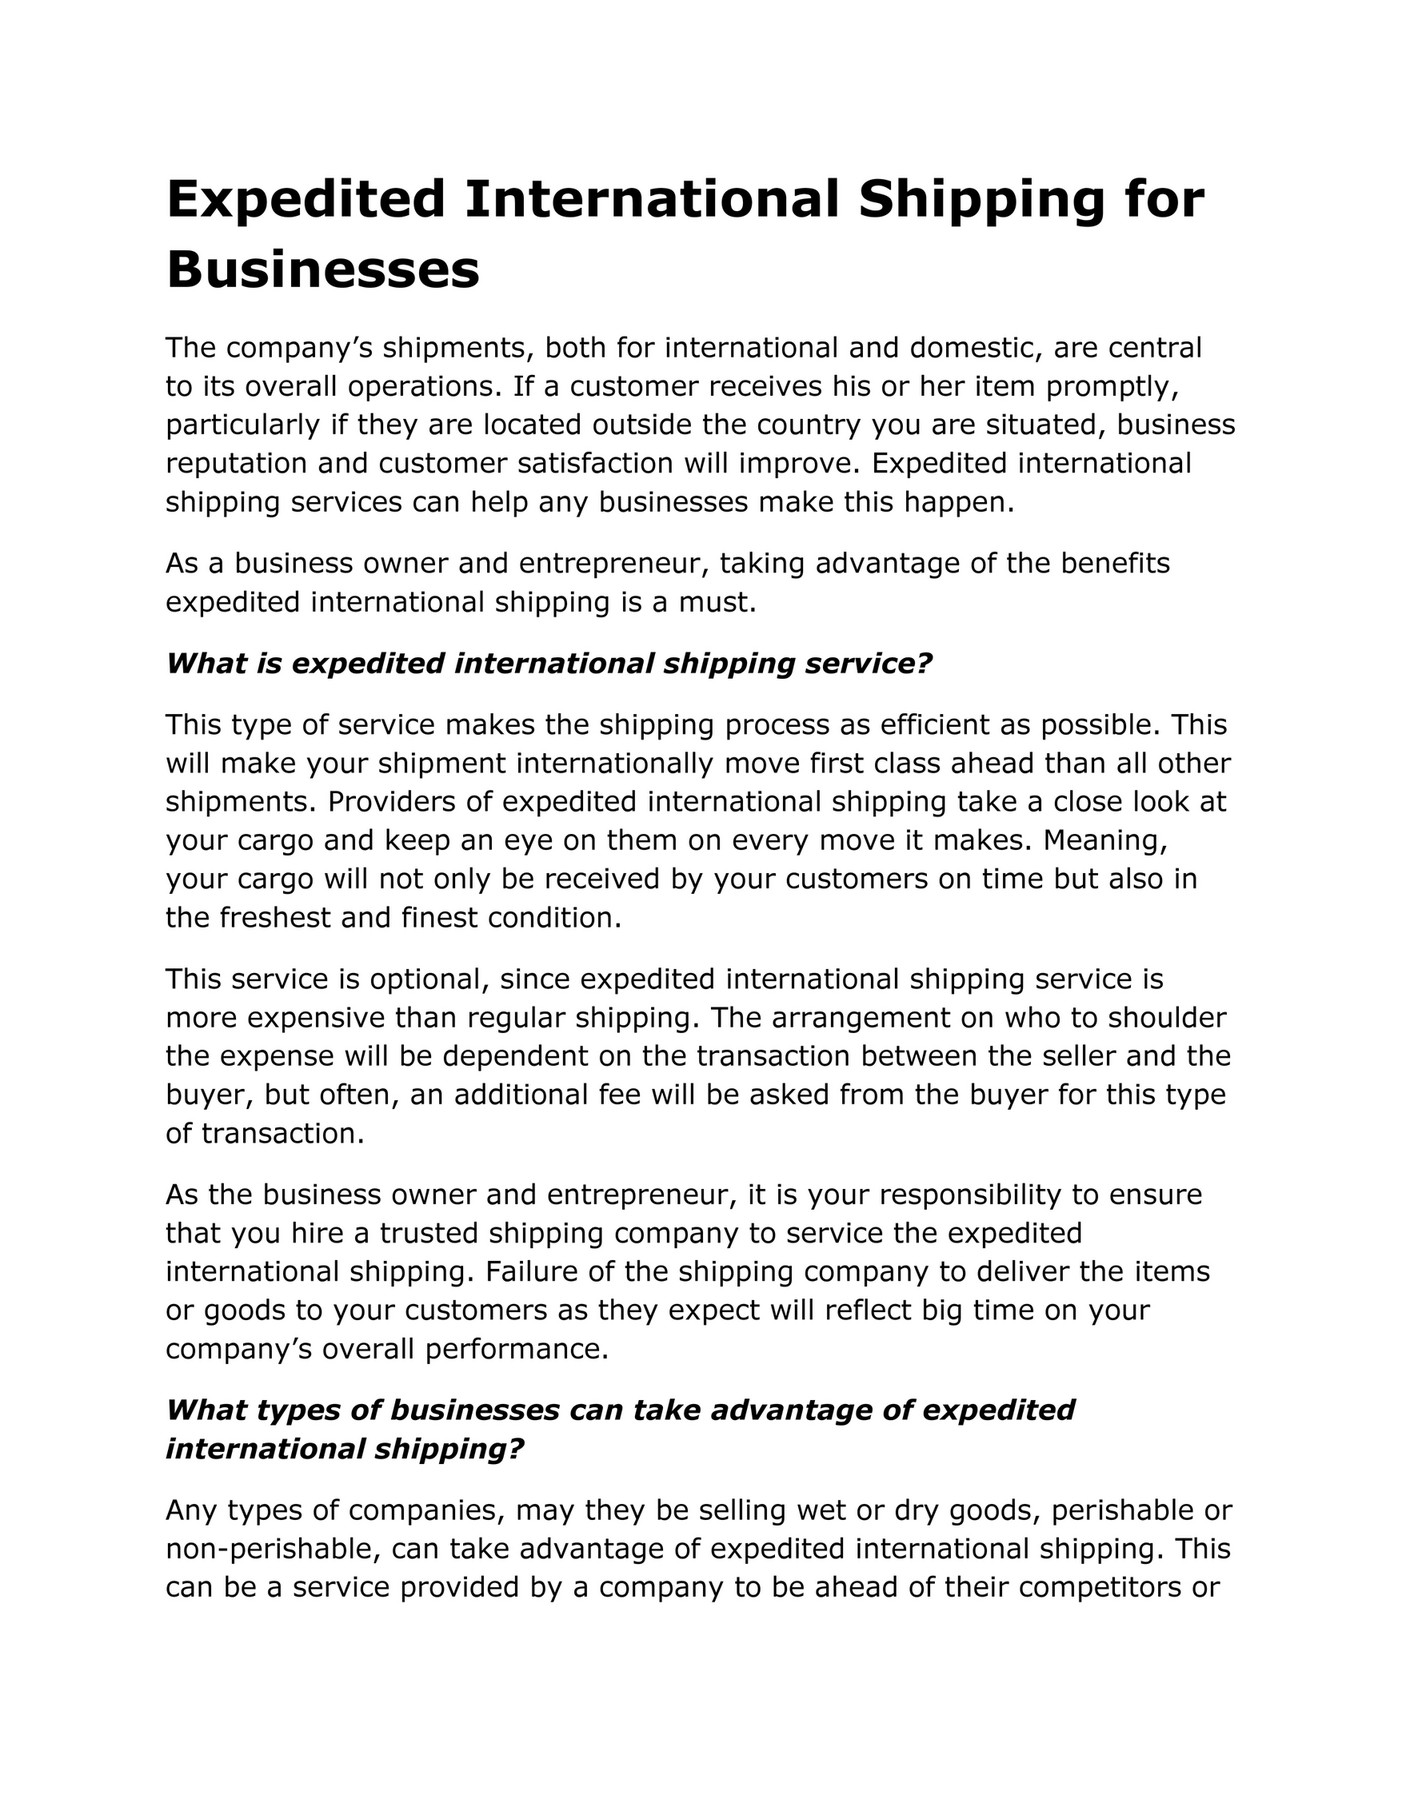 GIT Expert - Expedited International Shipping for Businesses - Page 1 ...